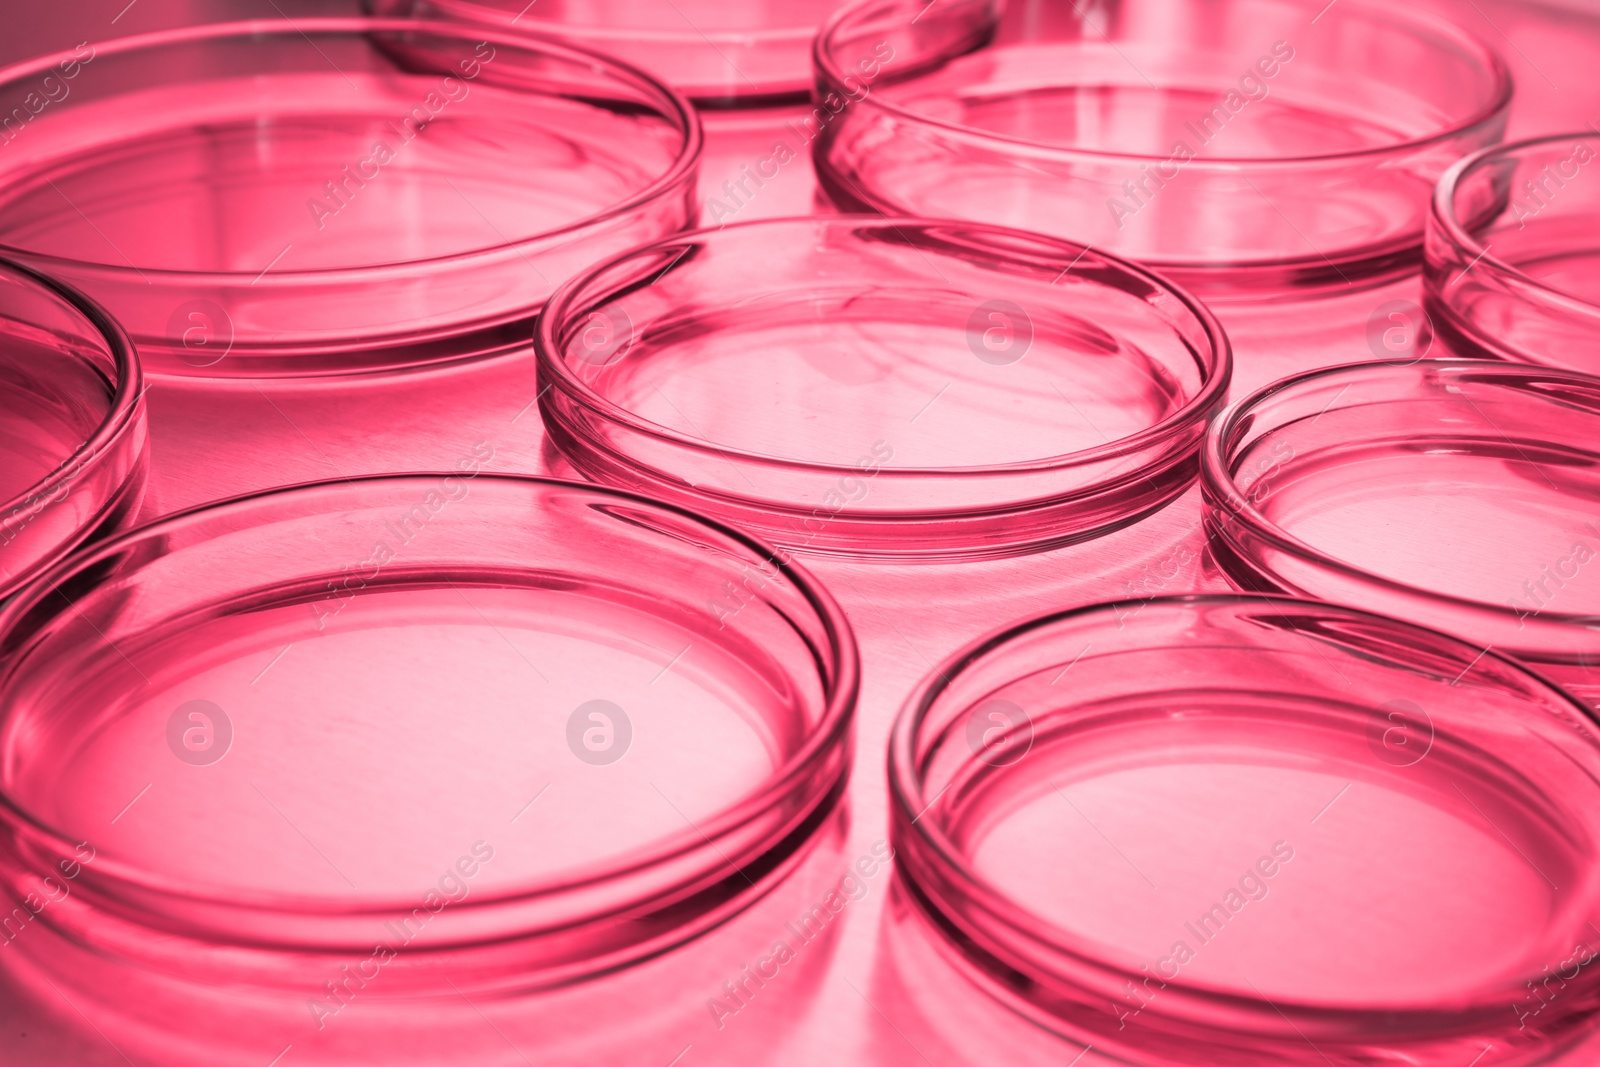 Image of Petri dishes with liquid on table, toned in red. Laboratory glassware